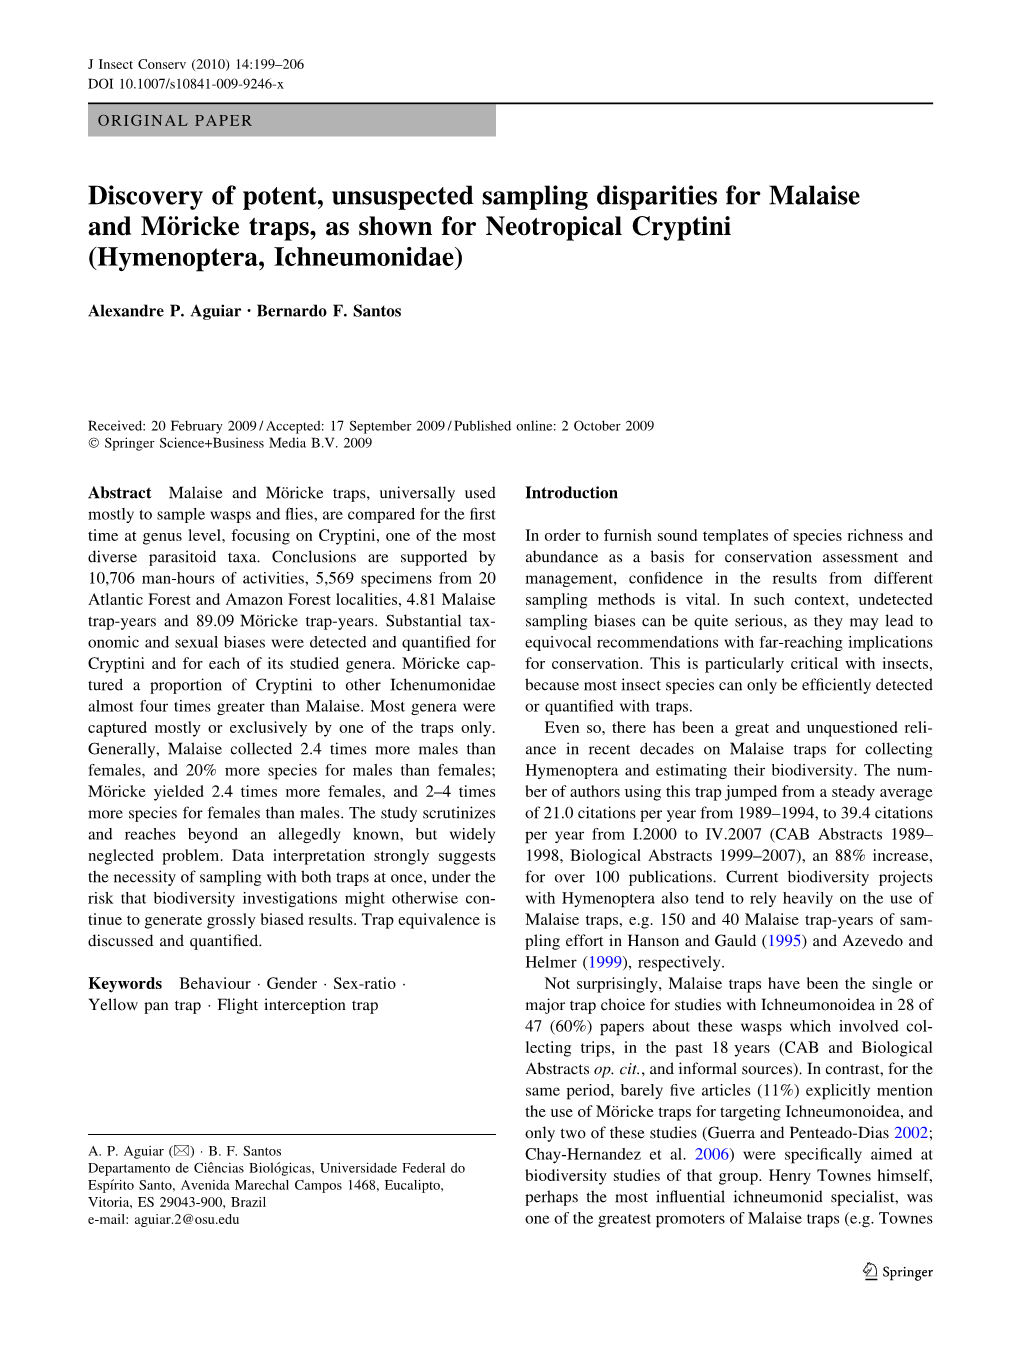 Discovery of Potent, Unsuspected Sampling Disparities for Malaise and Mo¨Ricke Traps, As Shown for Neotropical Cryptini (Hymenoptera, Ichneumonidae)